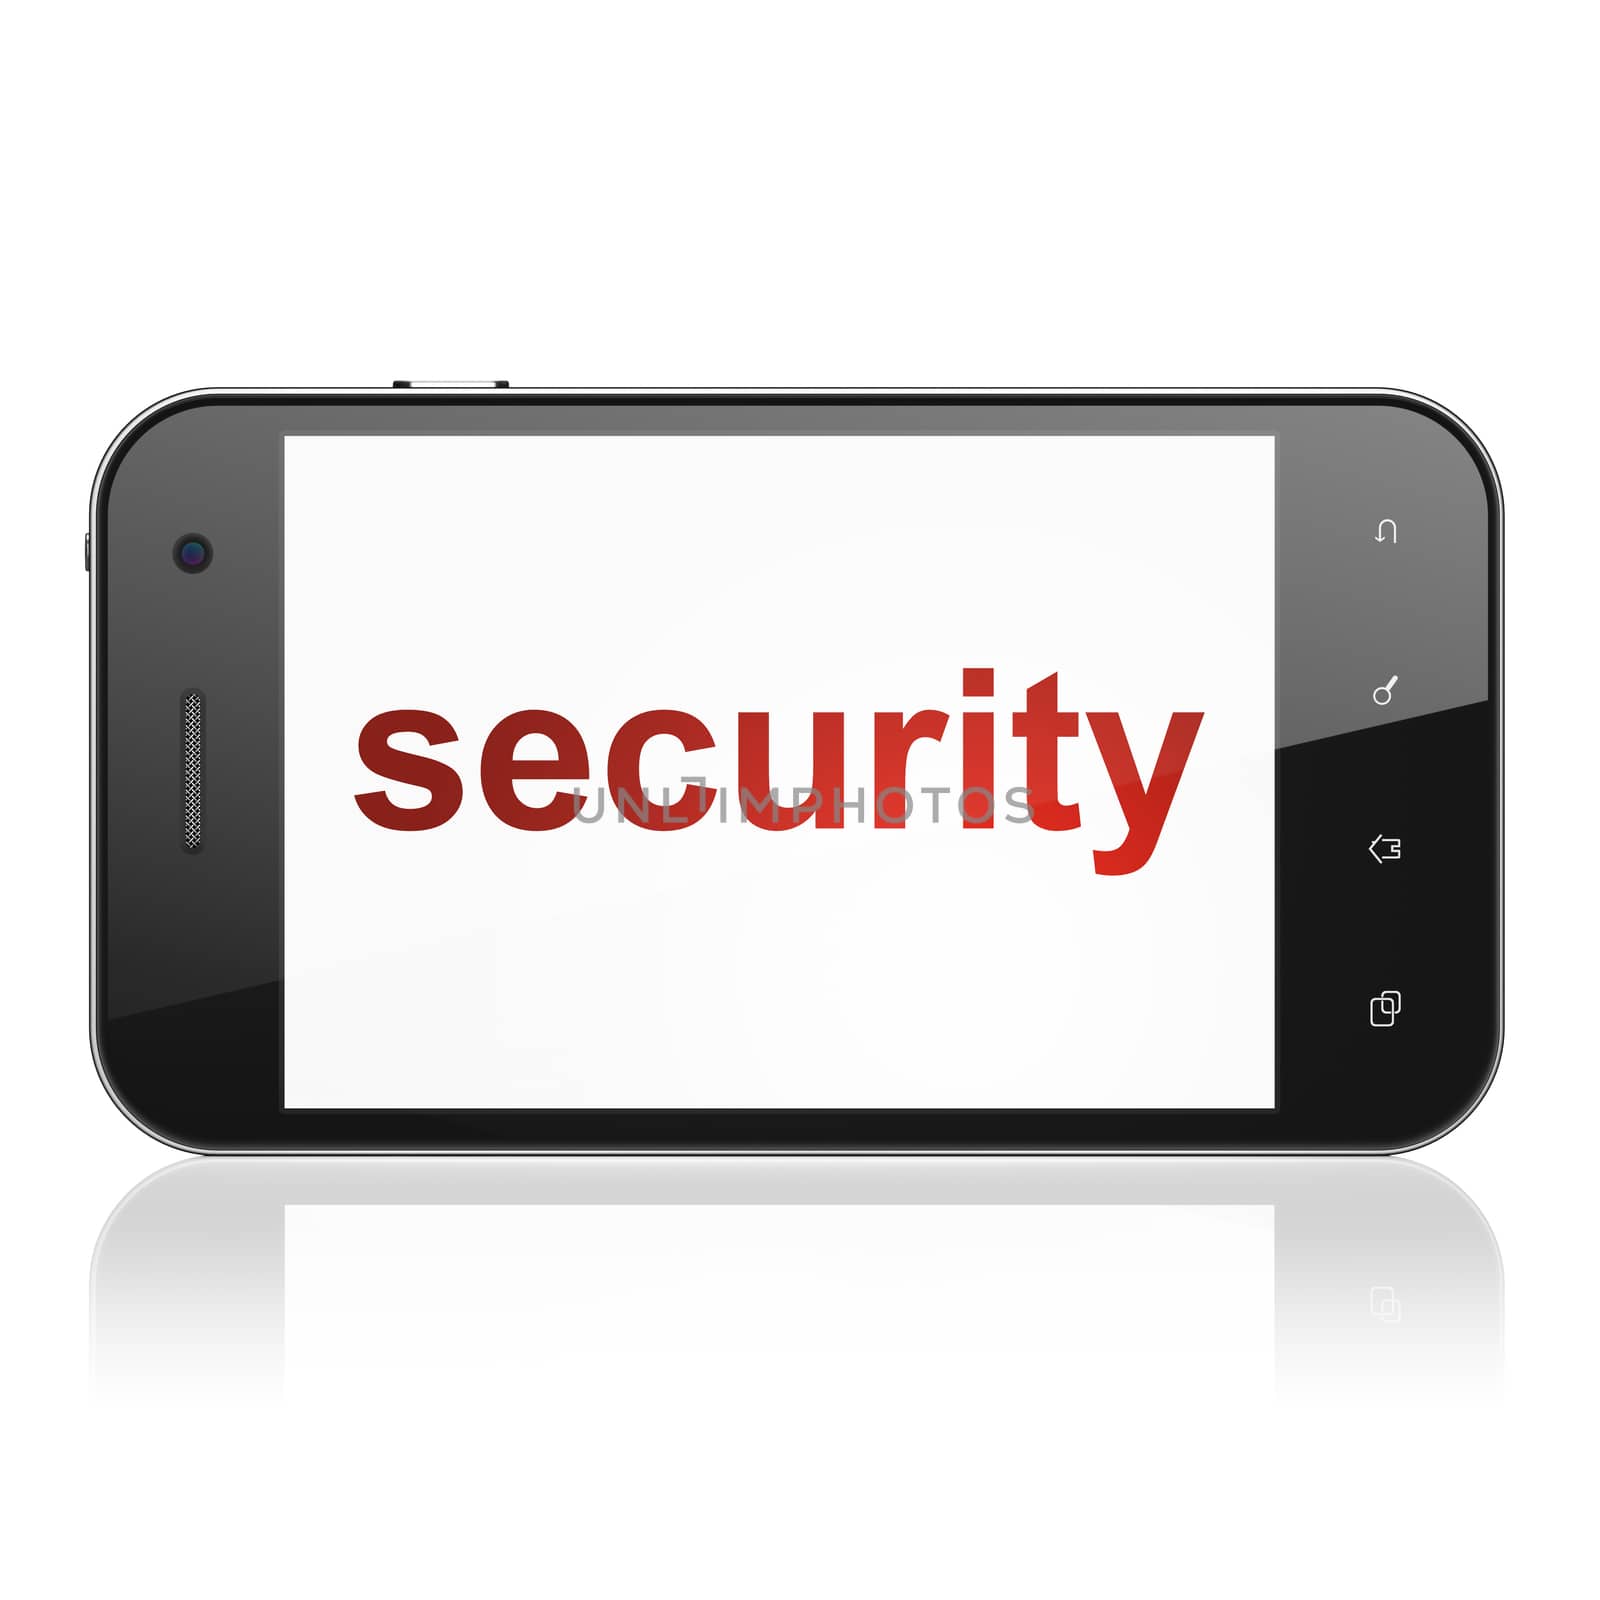 Protection concept: smartphone with text Security on display. Mobile smart phone on White background, cell phone 3d render